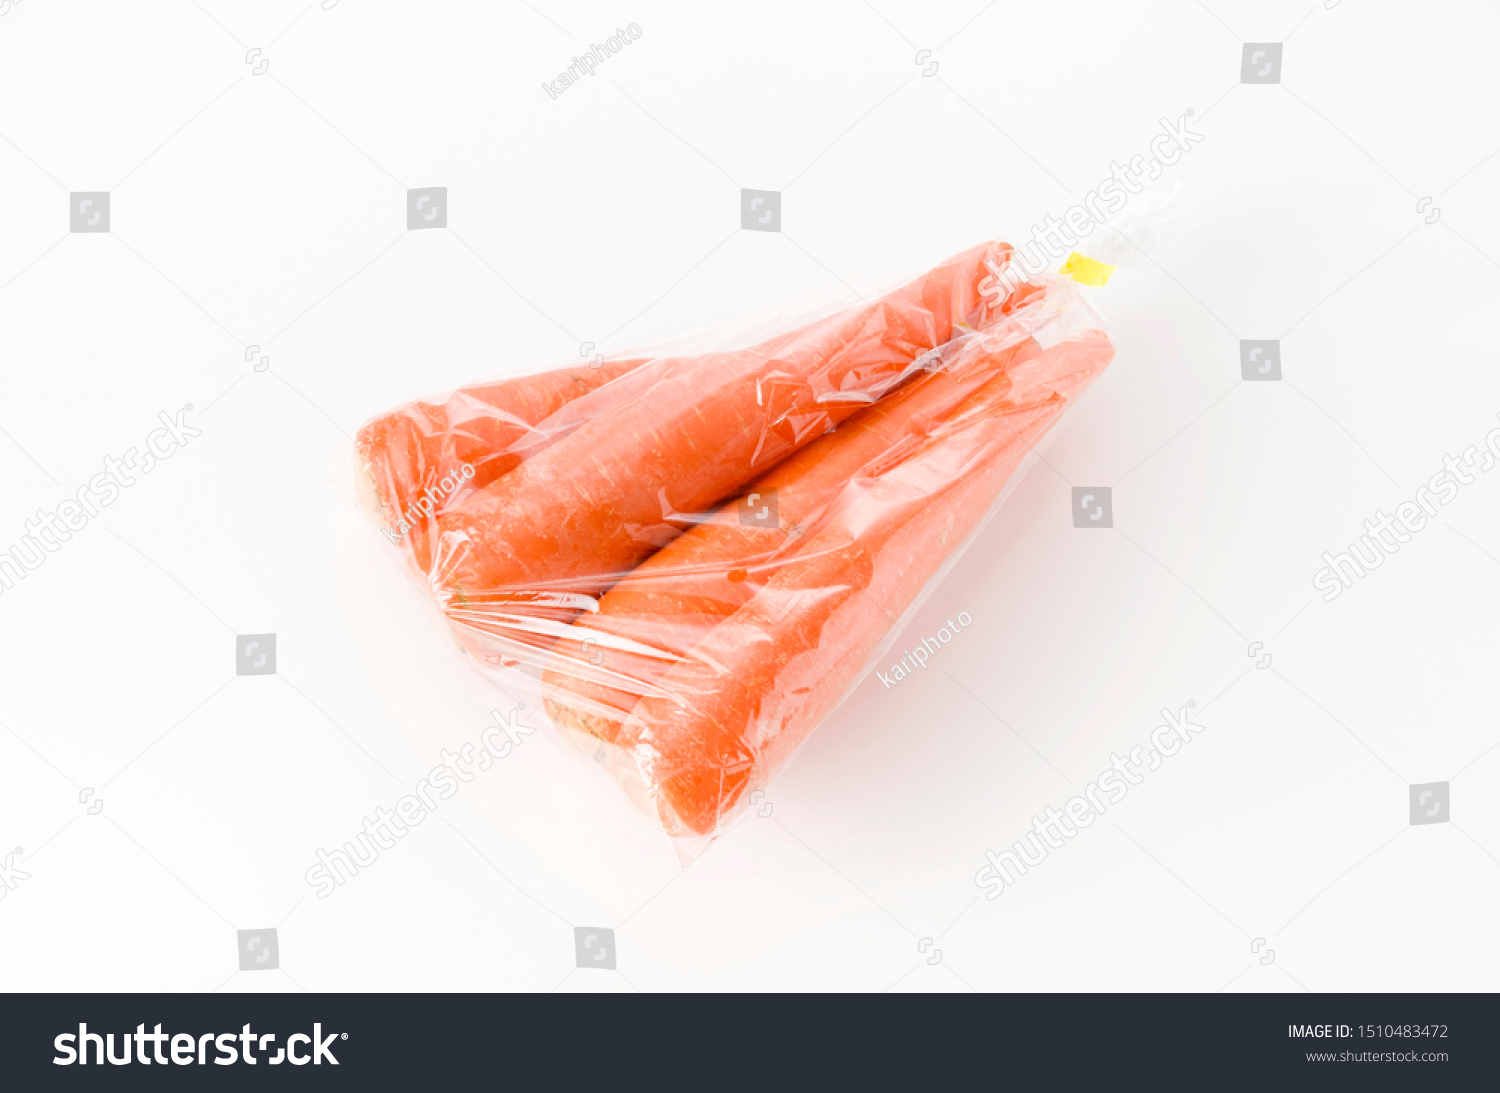 Download Fresh Carrot Plastic Bag On White Stock Photo Edit Now 1510483472 PSD Mockup Templates